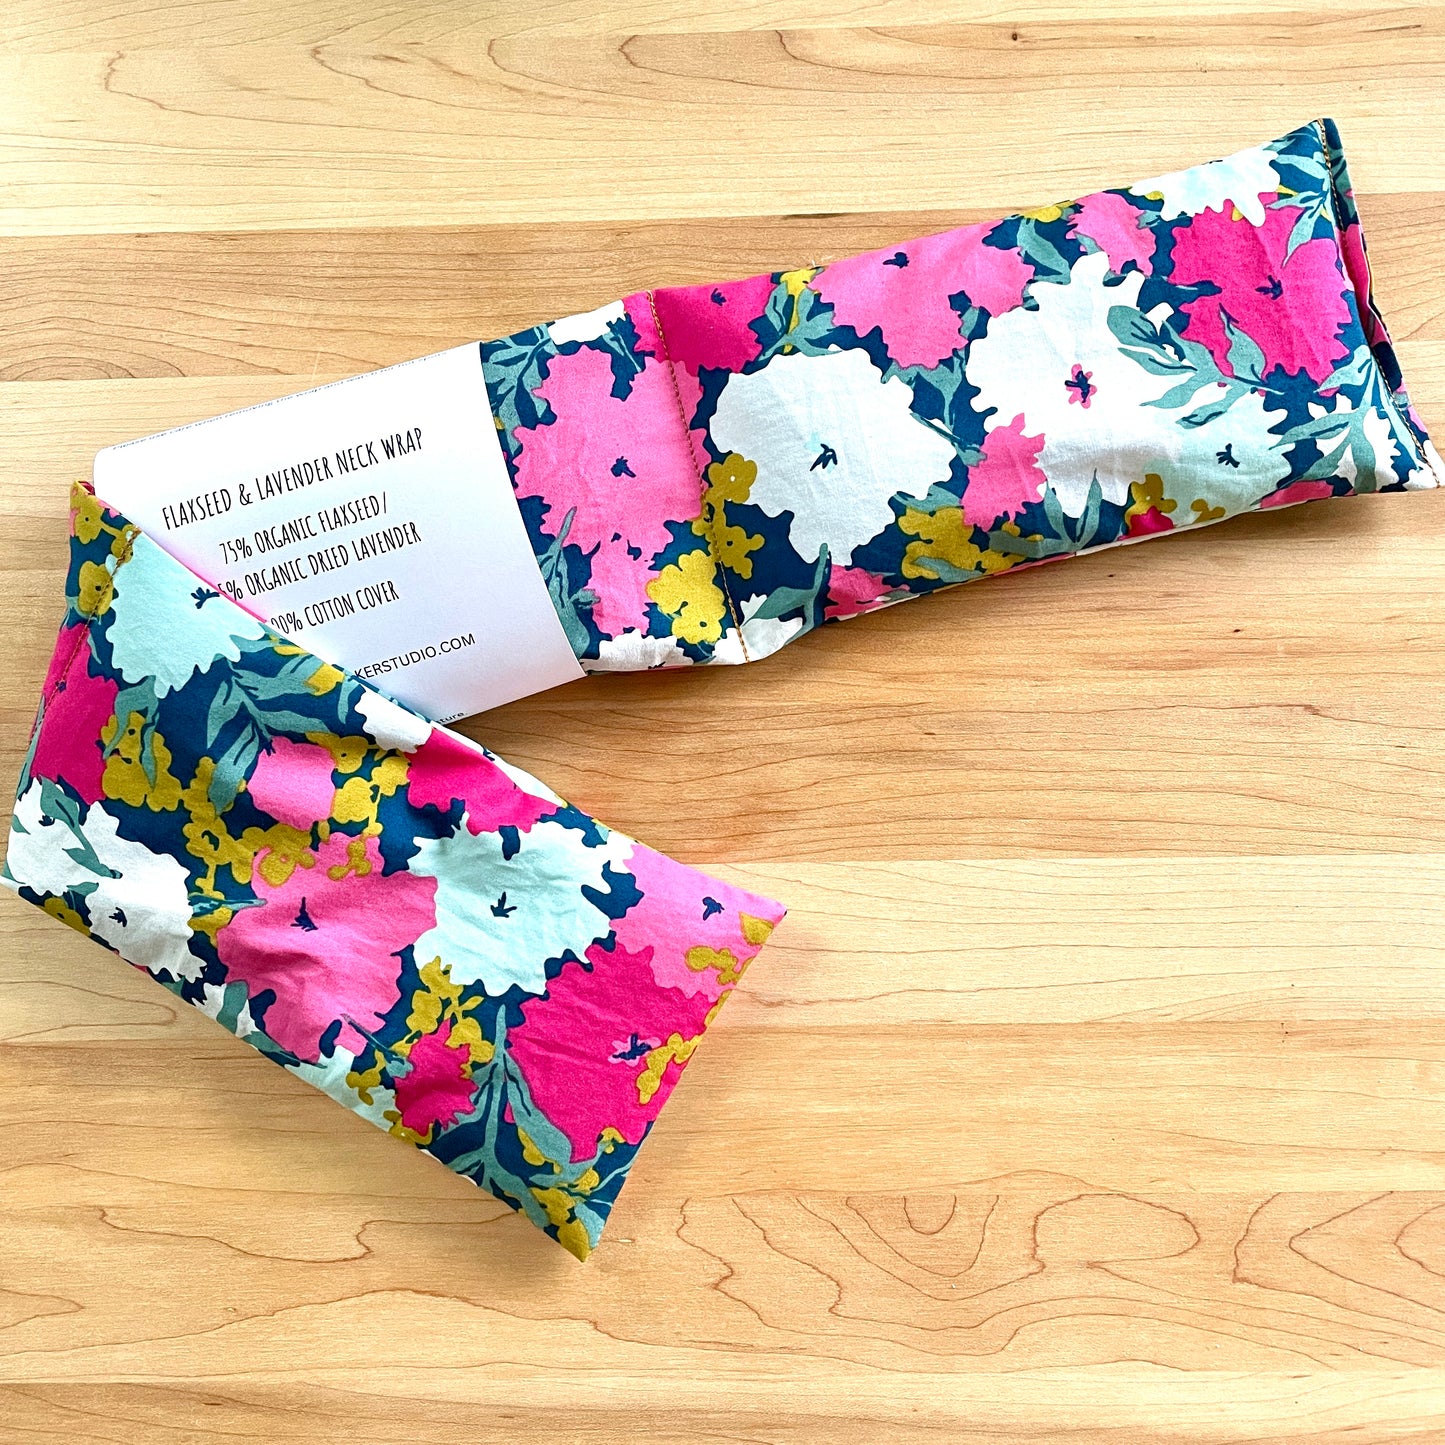 All Natural Flaxseed Neck Wrap, use Hot or Cold, Microwave Safe, Add Lavender for Aromatherapy